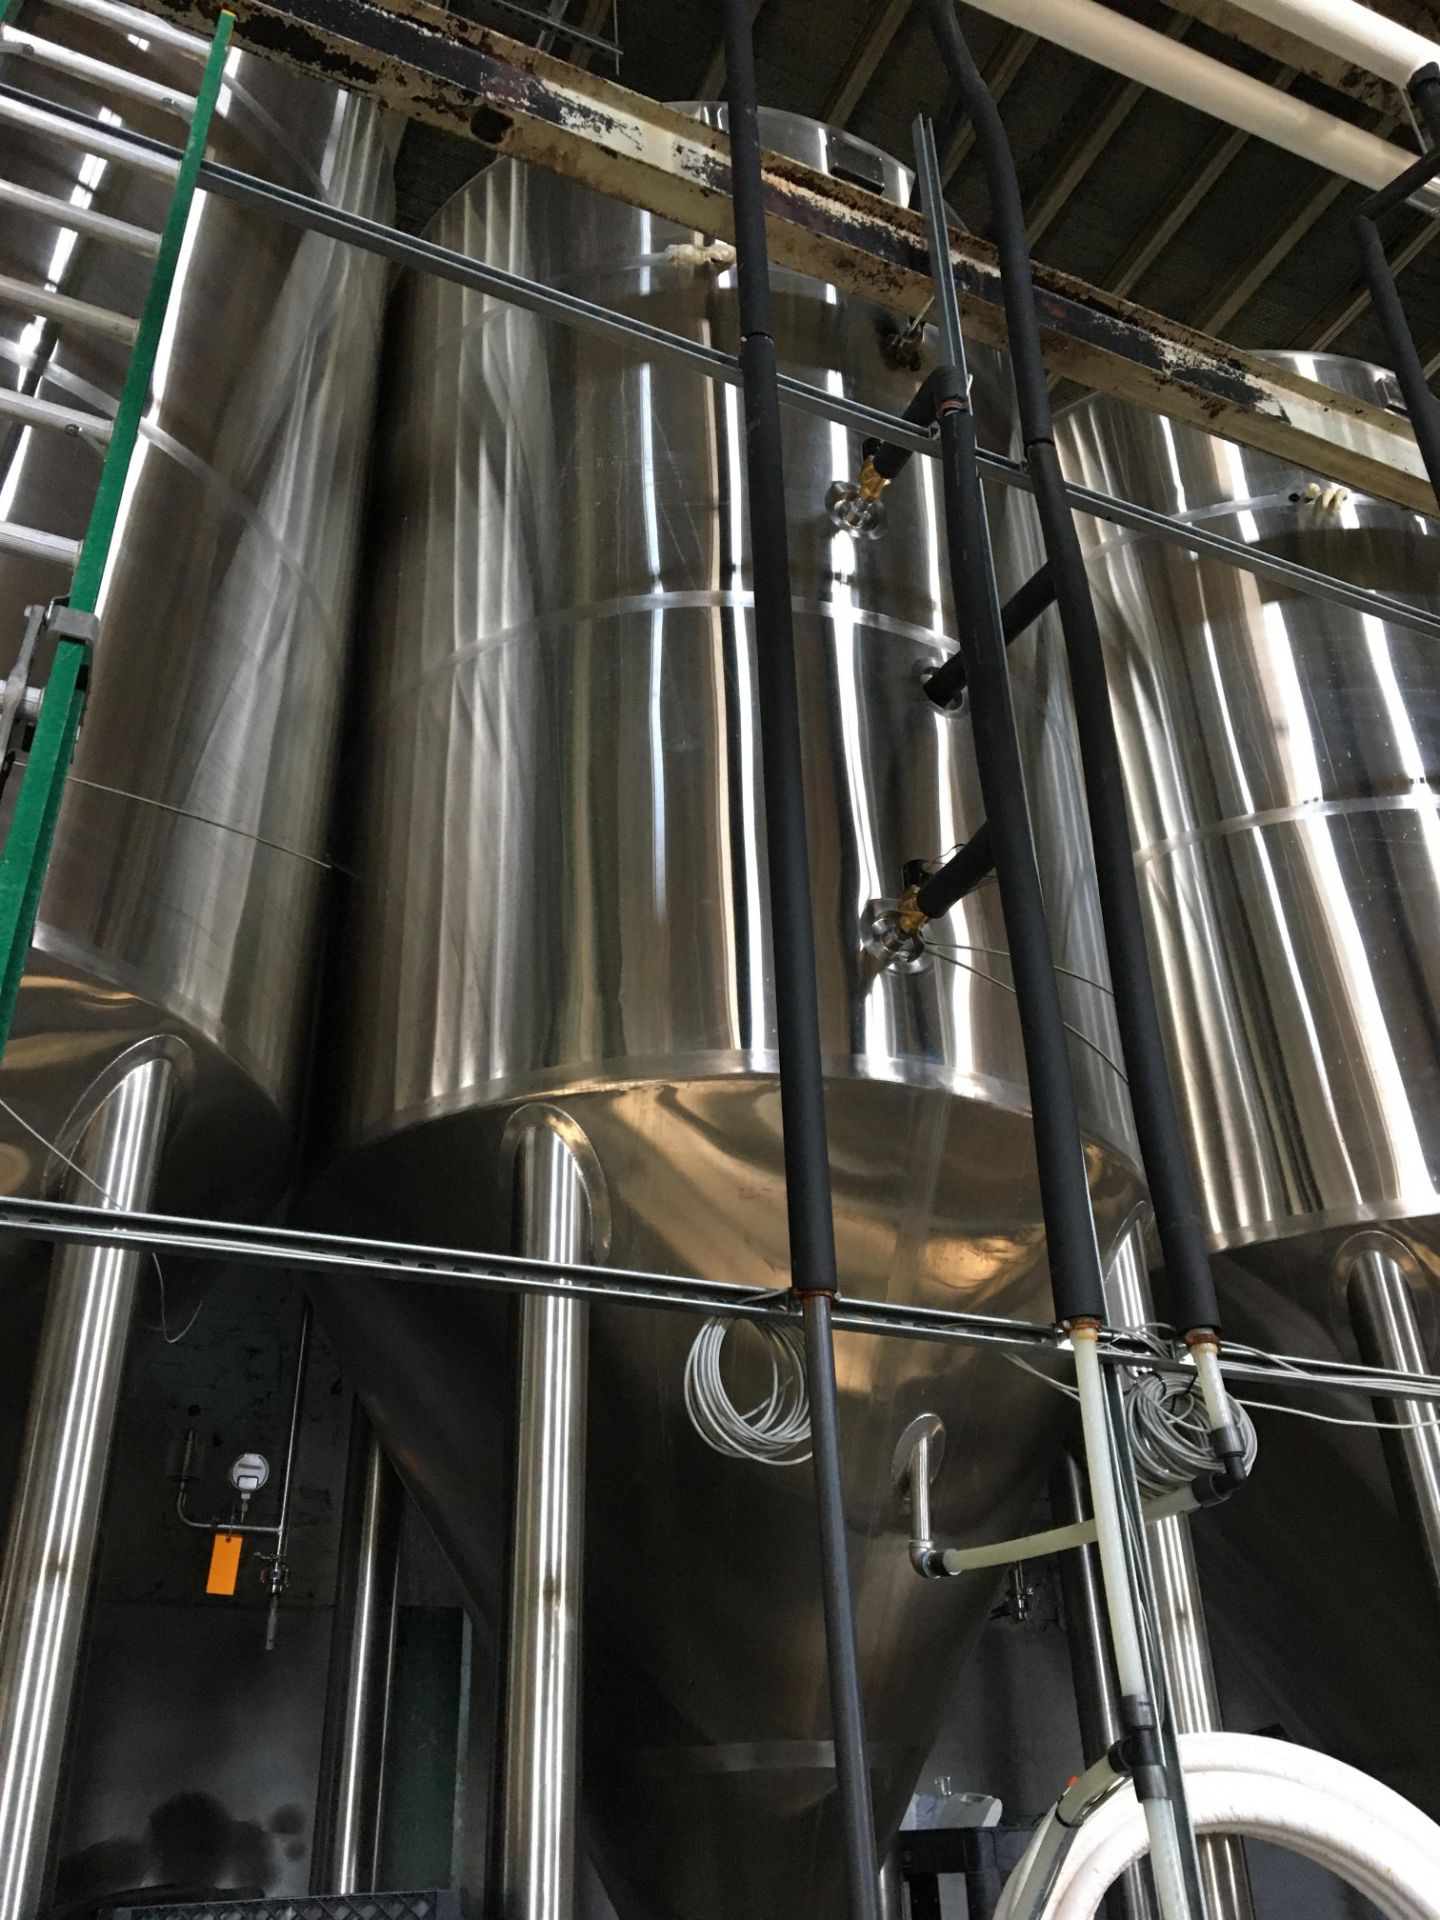 80-BBL Minnetonka Fermentation Tank, Model 80-BBL, Year 2017, Stainless Steel; Vessel store wort and - Image 5 of 17